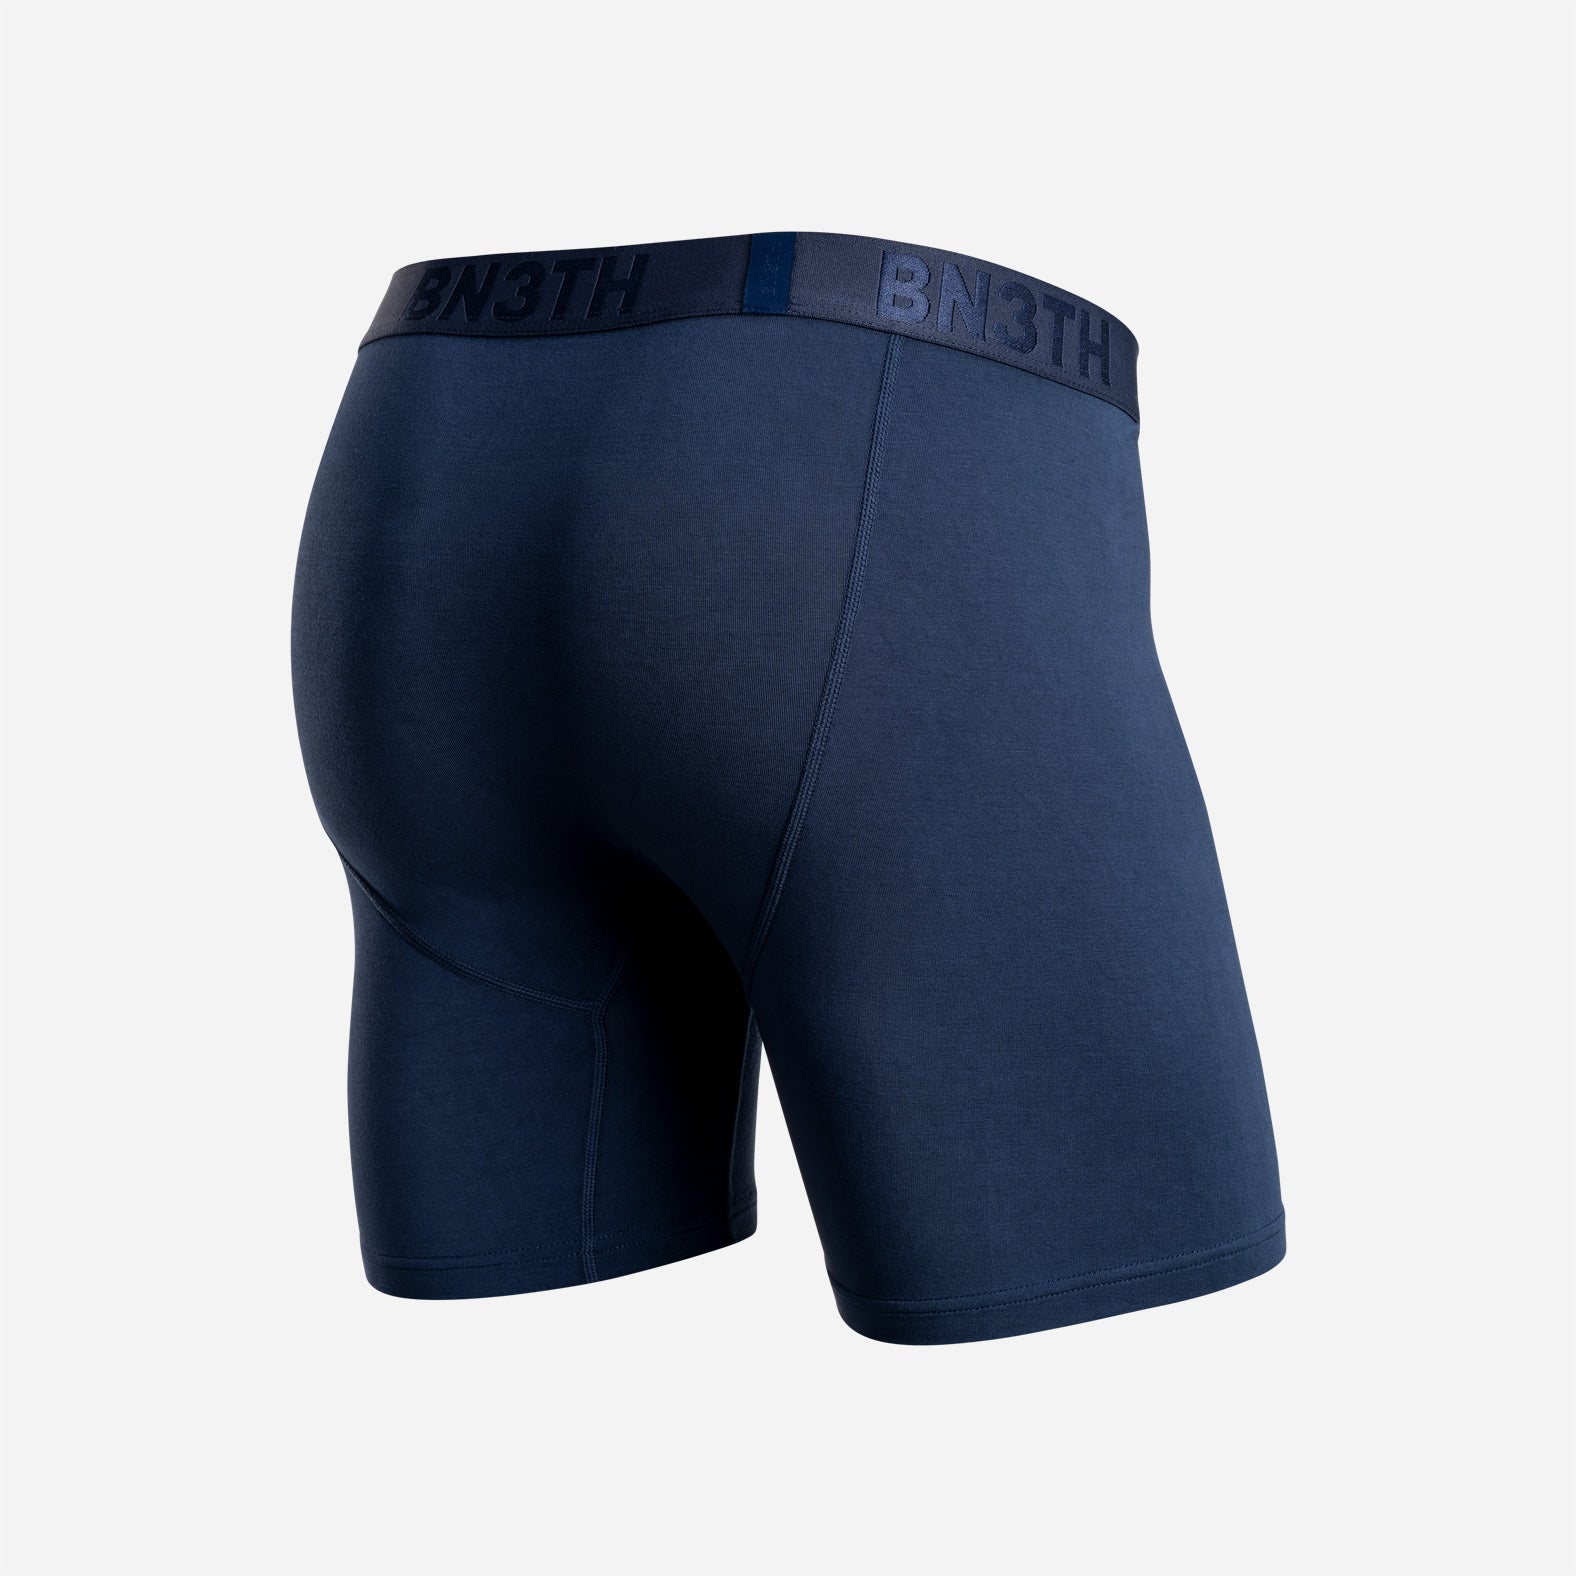 Navy Check Classic Woven Boxers - 2 Pair Pack